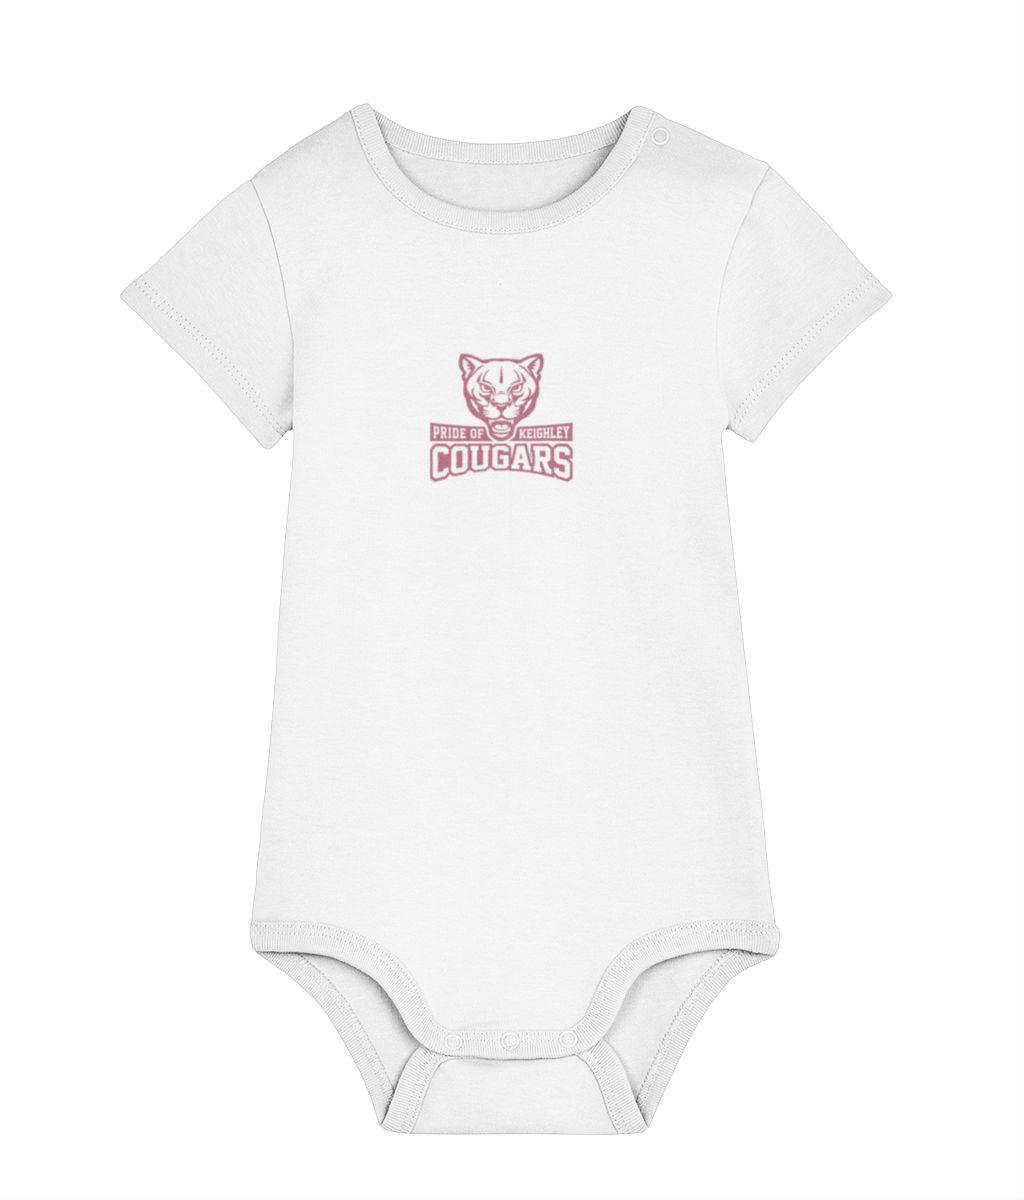 Keighley Cougars Pink Baby Body Suit in White